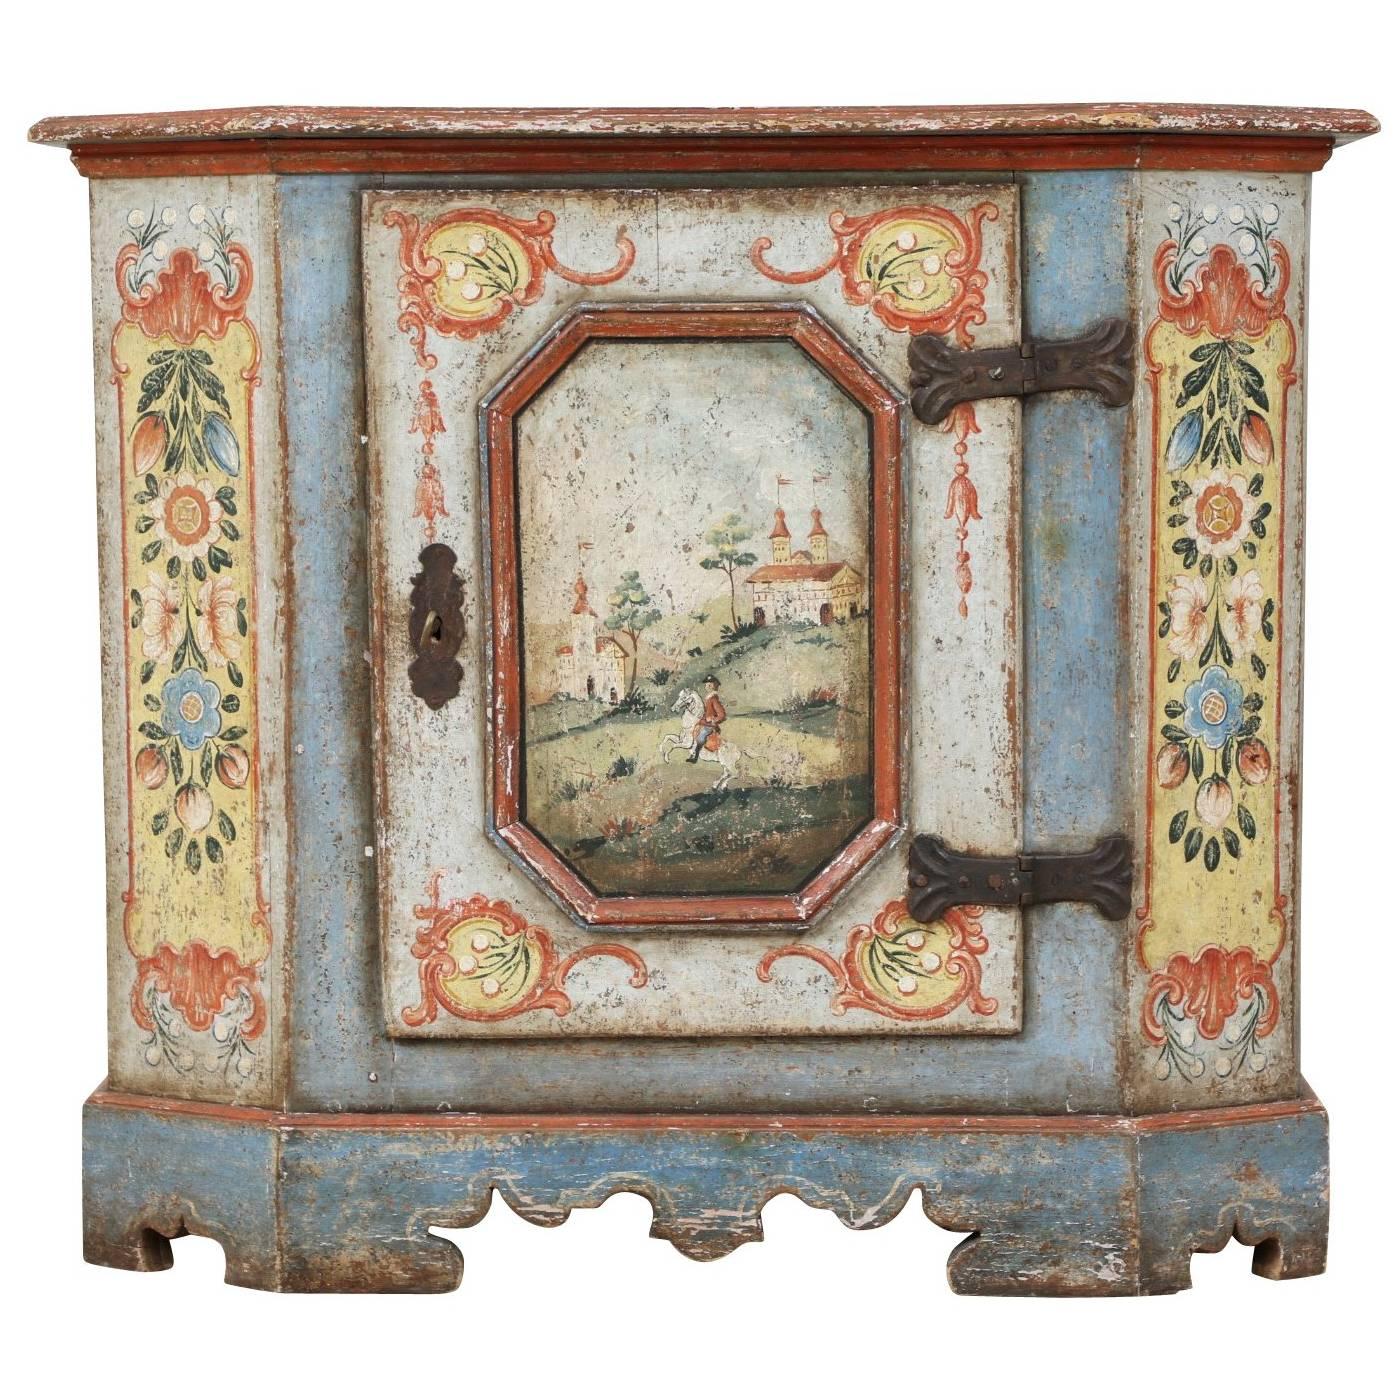 Bavarian or Hungarian Polychrome Paint Decorated Cabinet